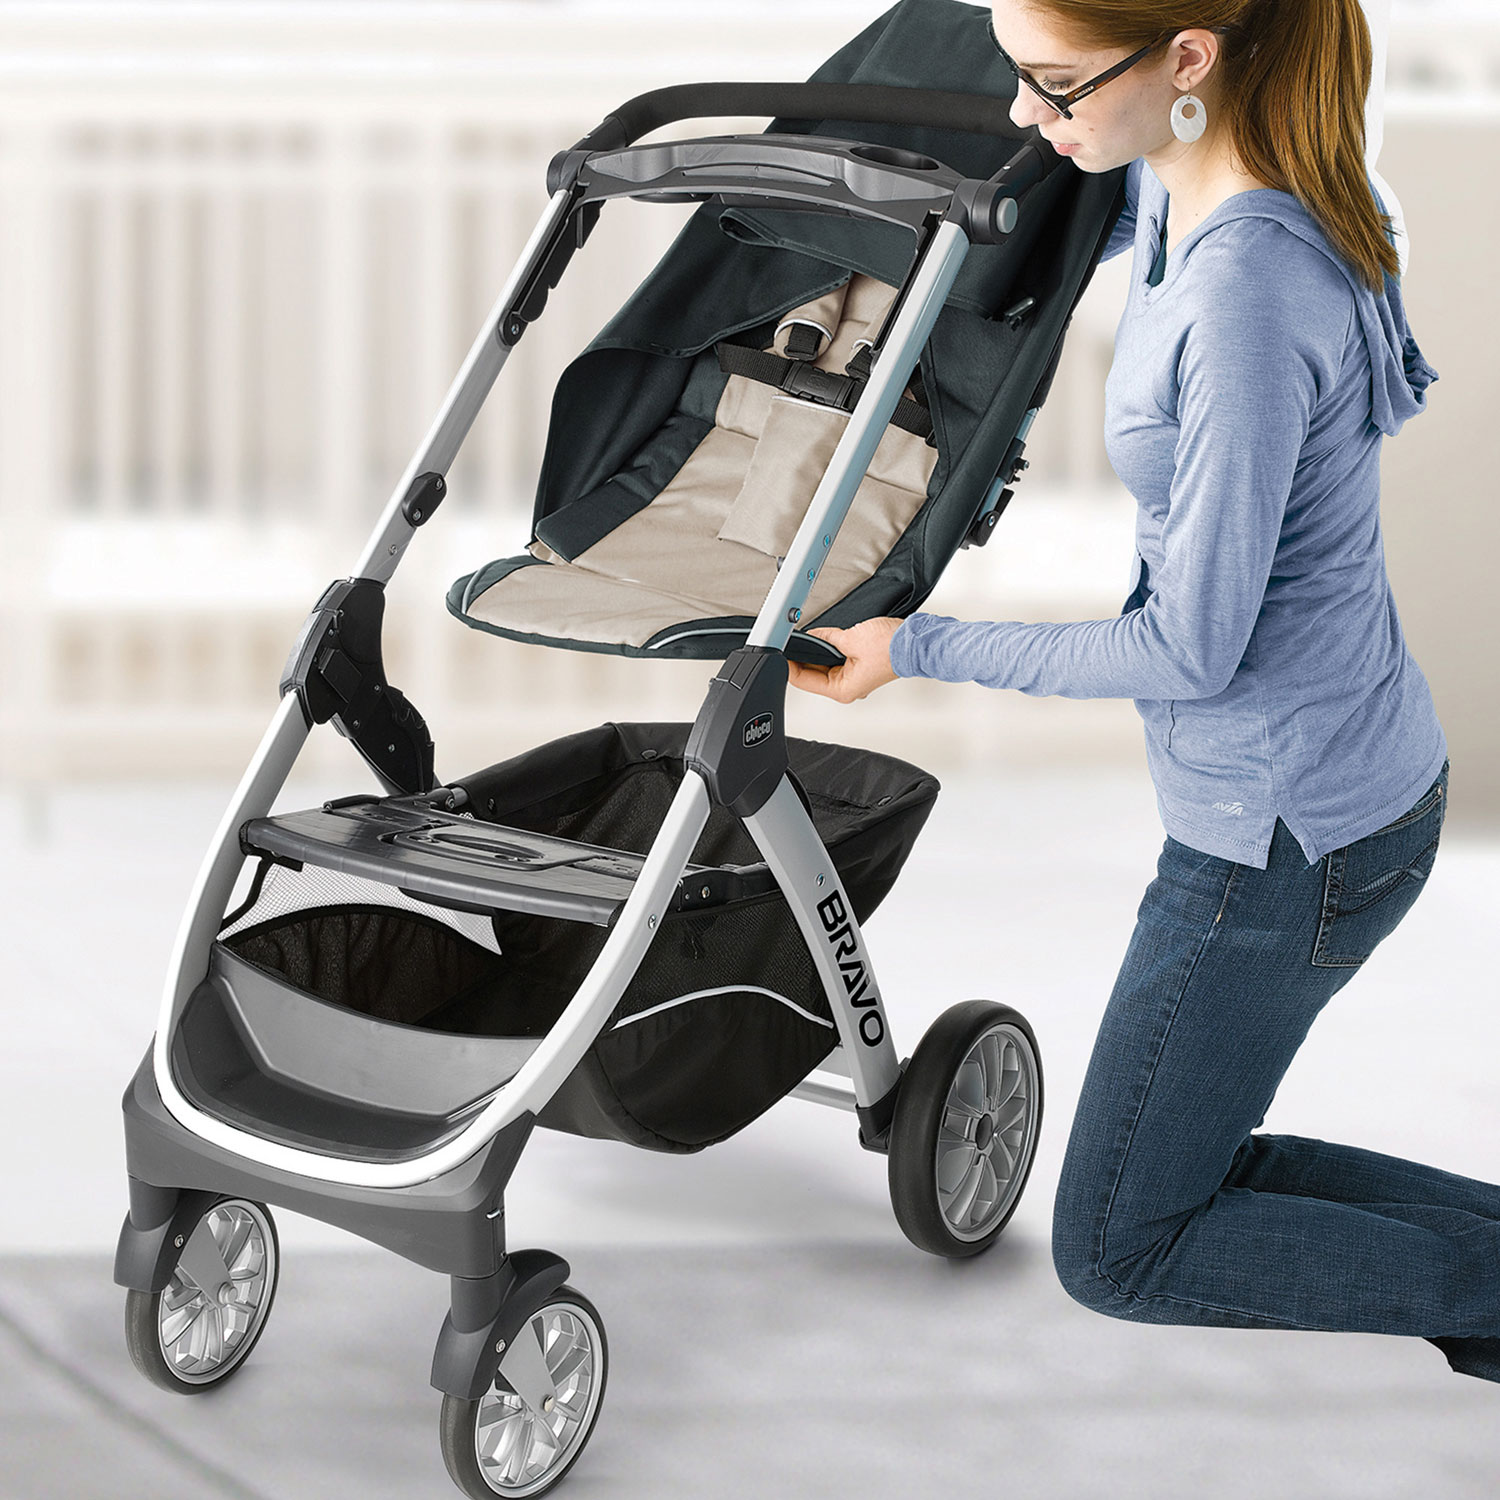 stroller buying guide - chicco bravo putting on seat